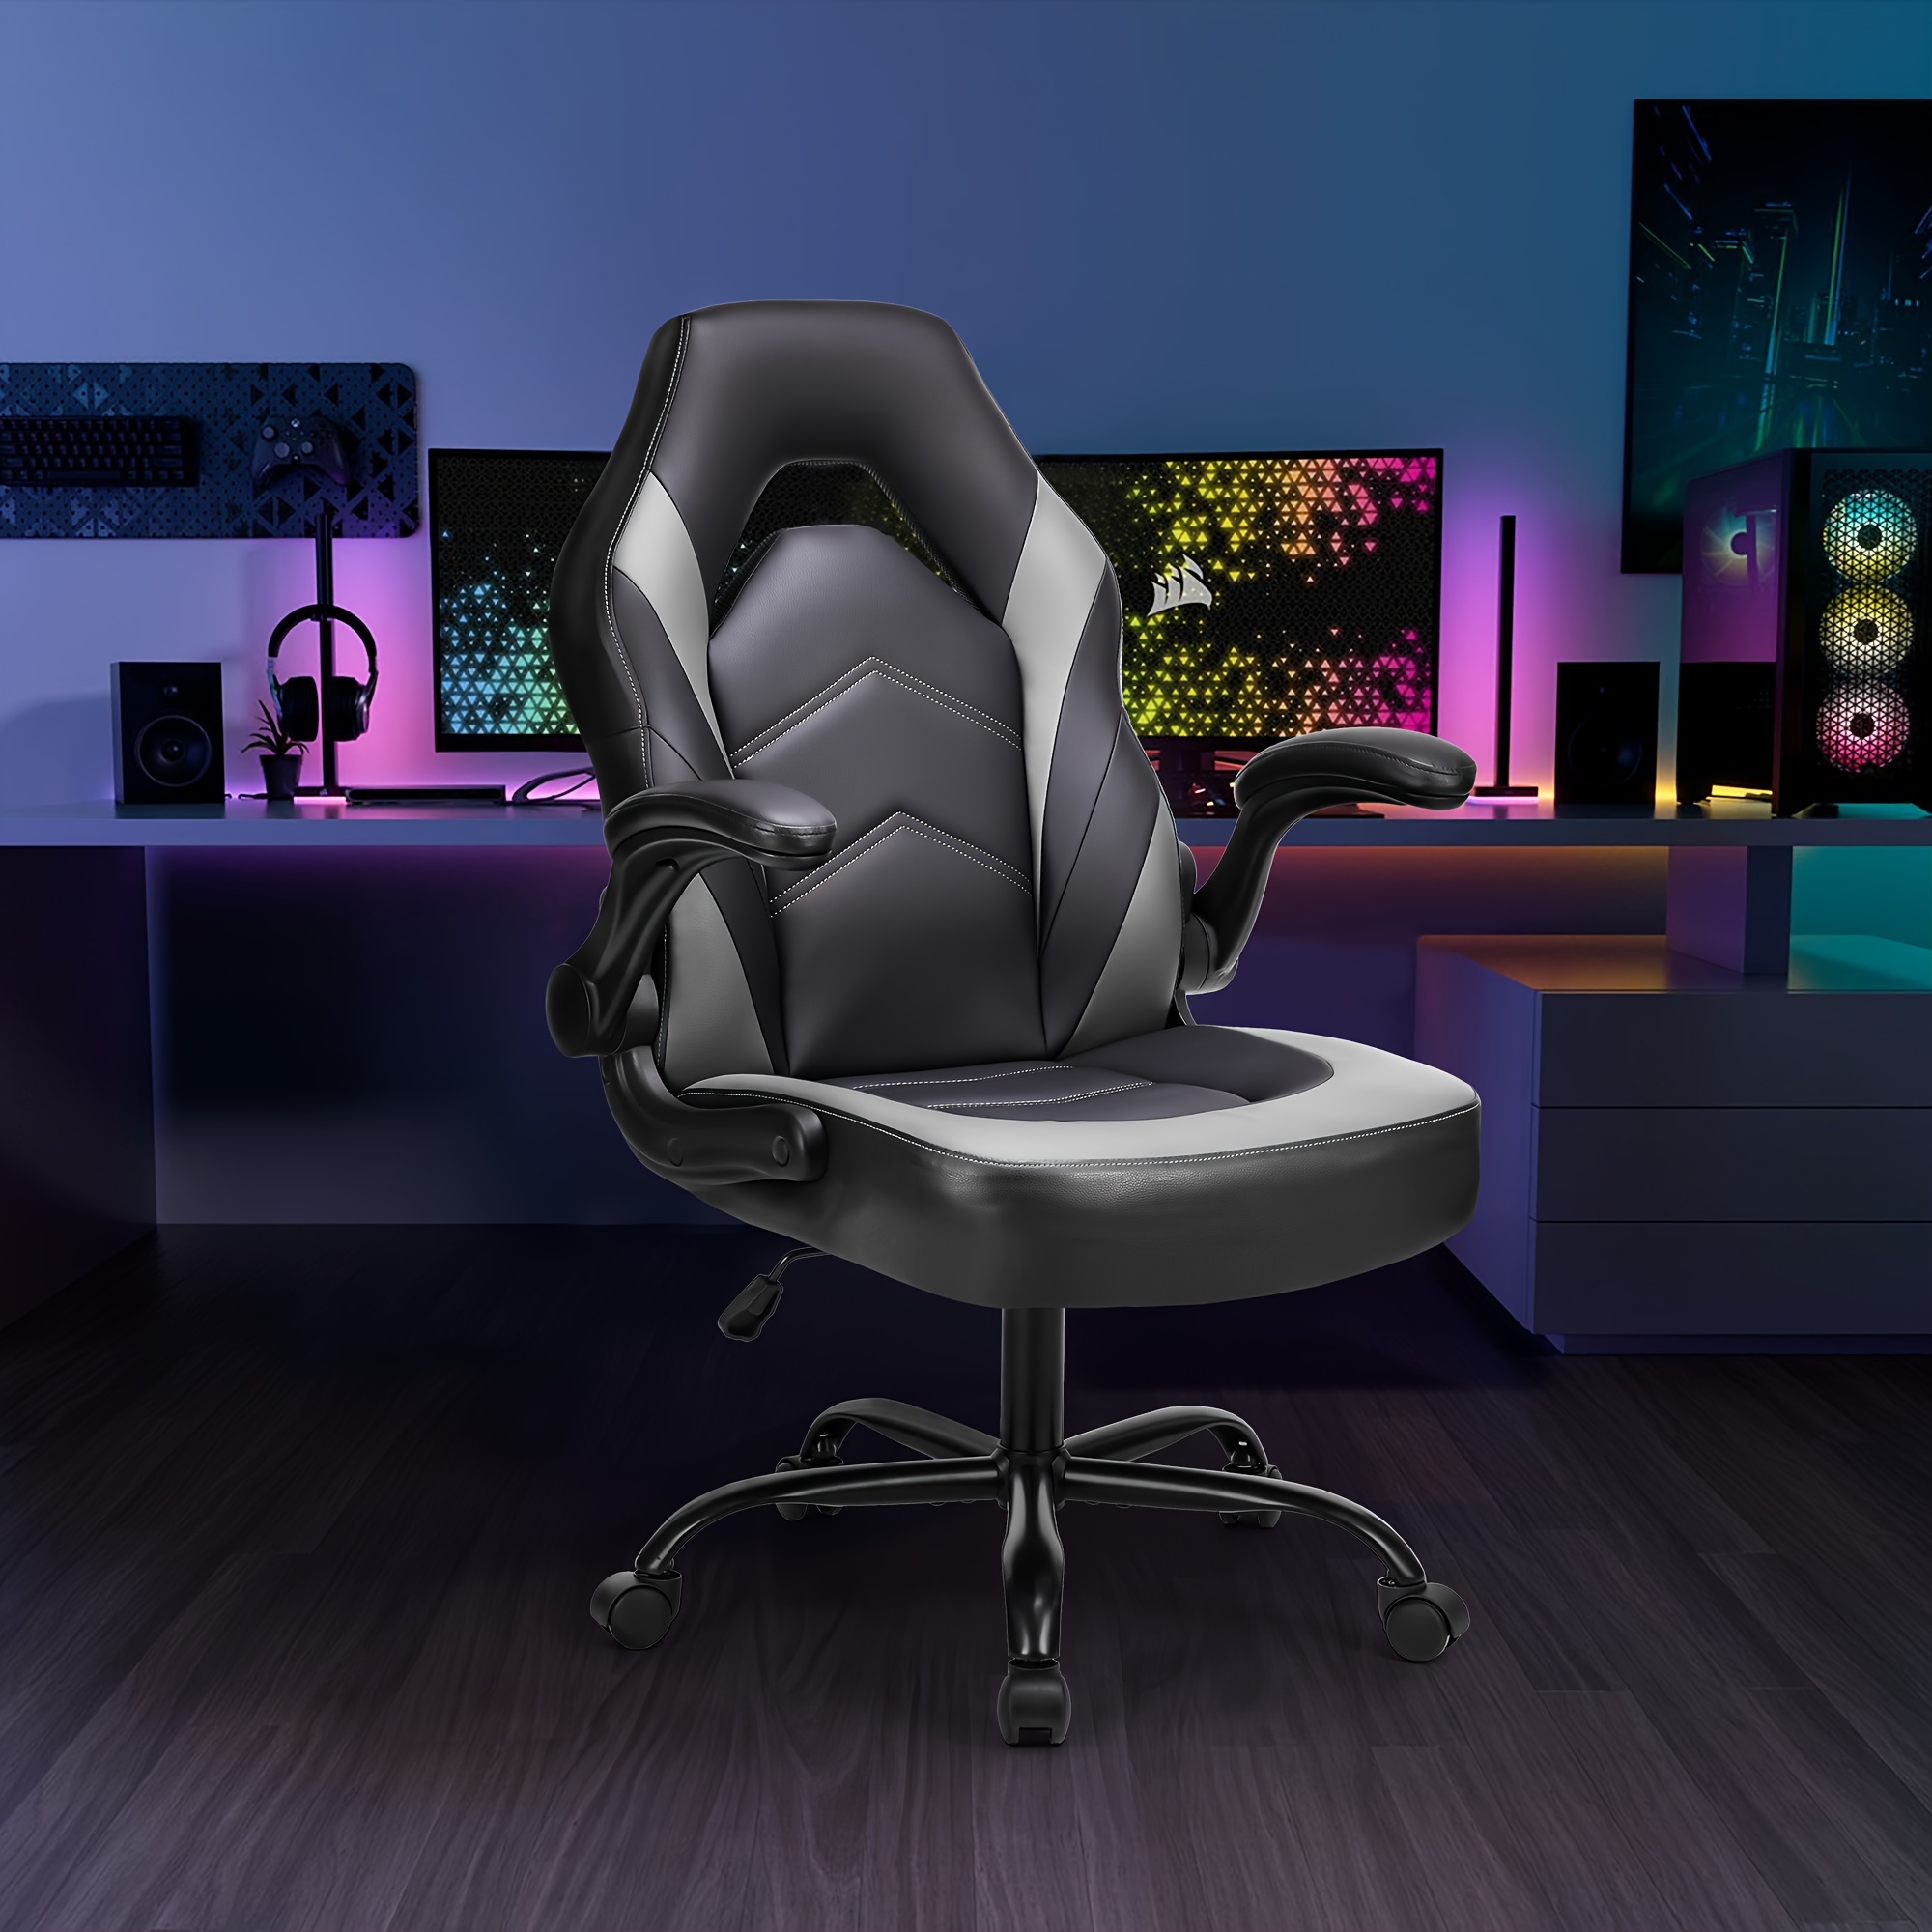 

Ergonomic Lumbar Support Esports Chair, Paded Flip-up Armrest, Adjustable Headrest Skin-friendly Fabric And Foam Seat Cushion Bring Perfect Gaming Experience